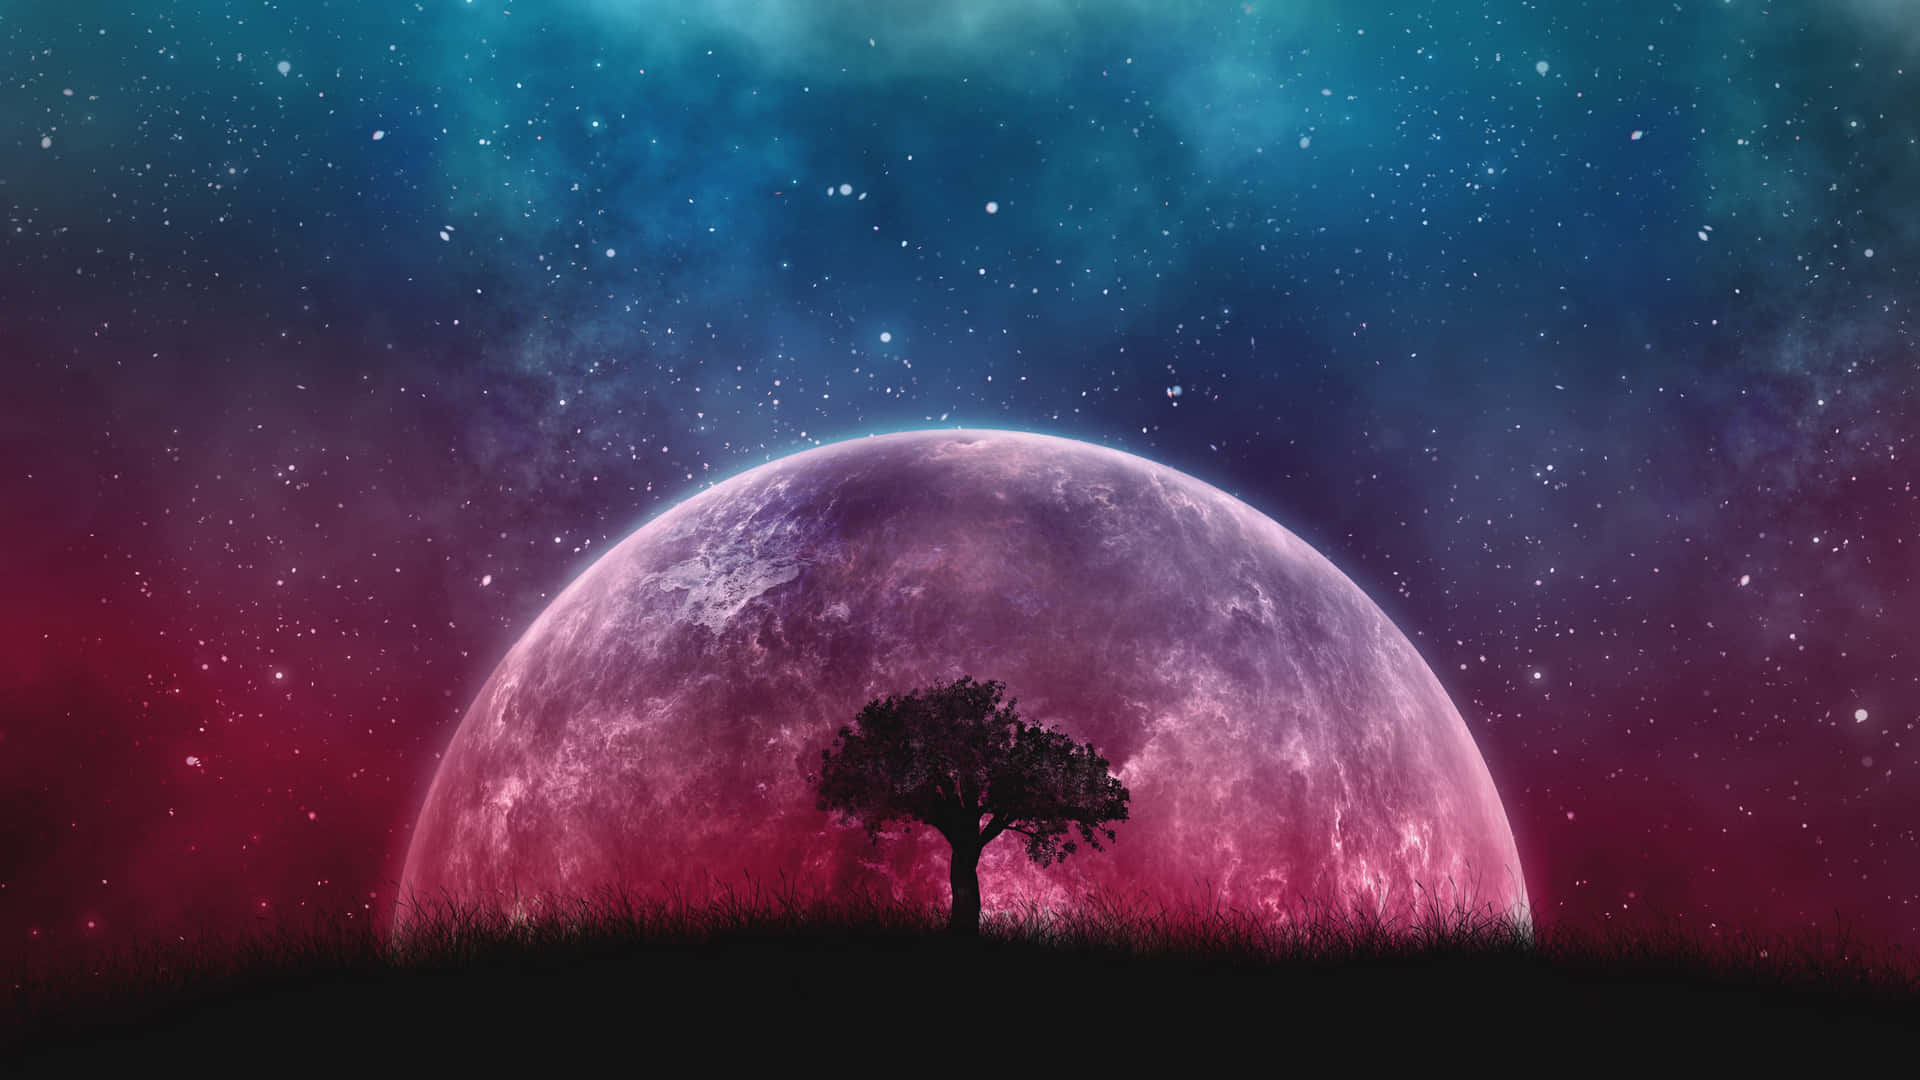 Cosmic Landscapewith Lone Tree Wallpaper